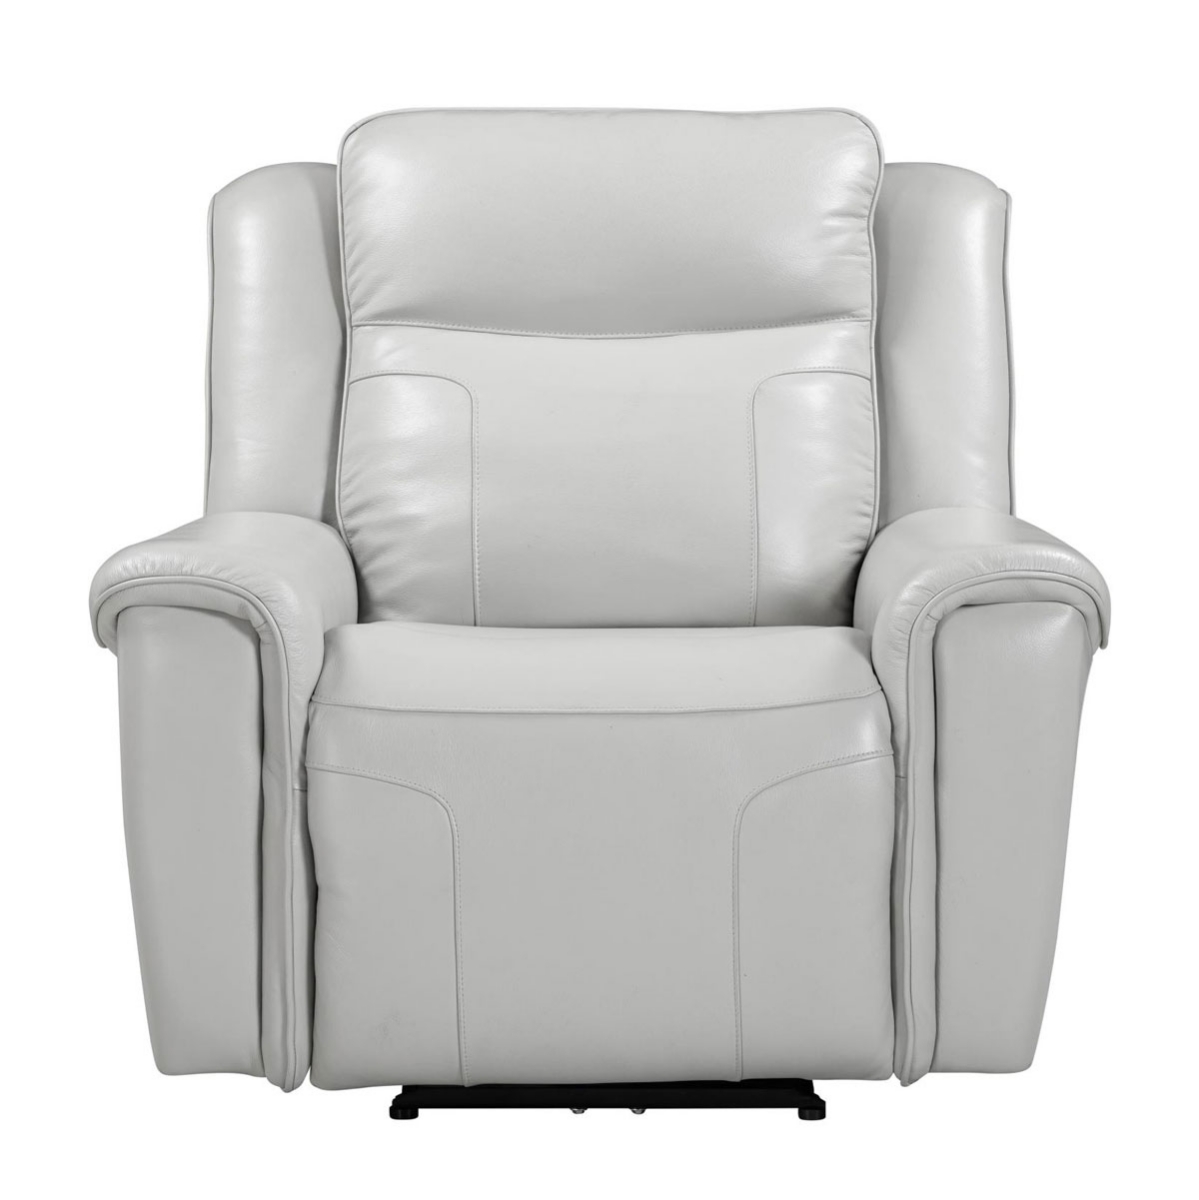 Picture of MARA RECLINER W/PHR